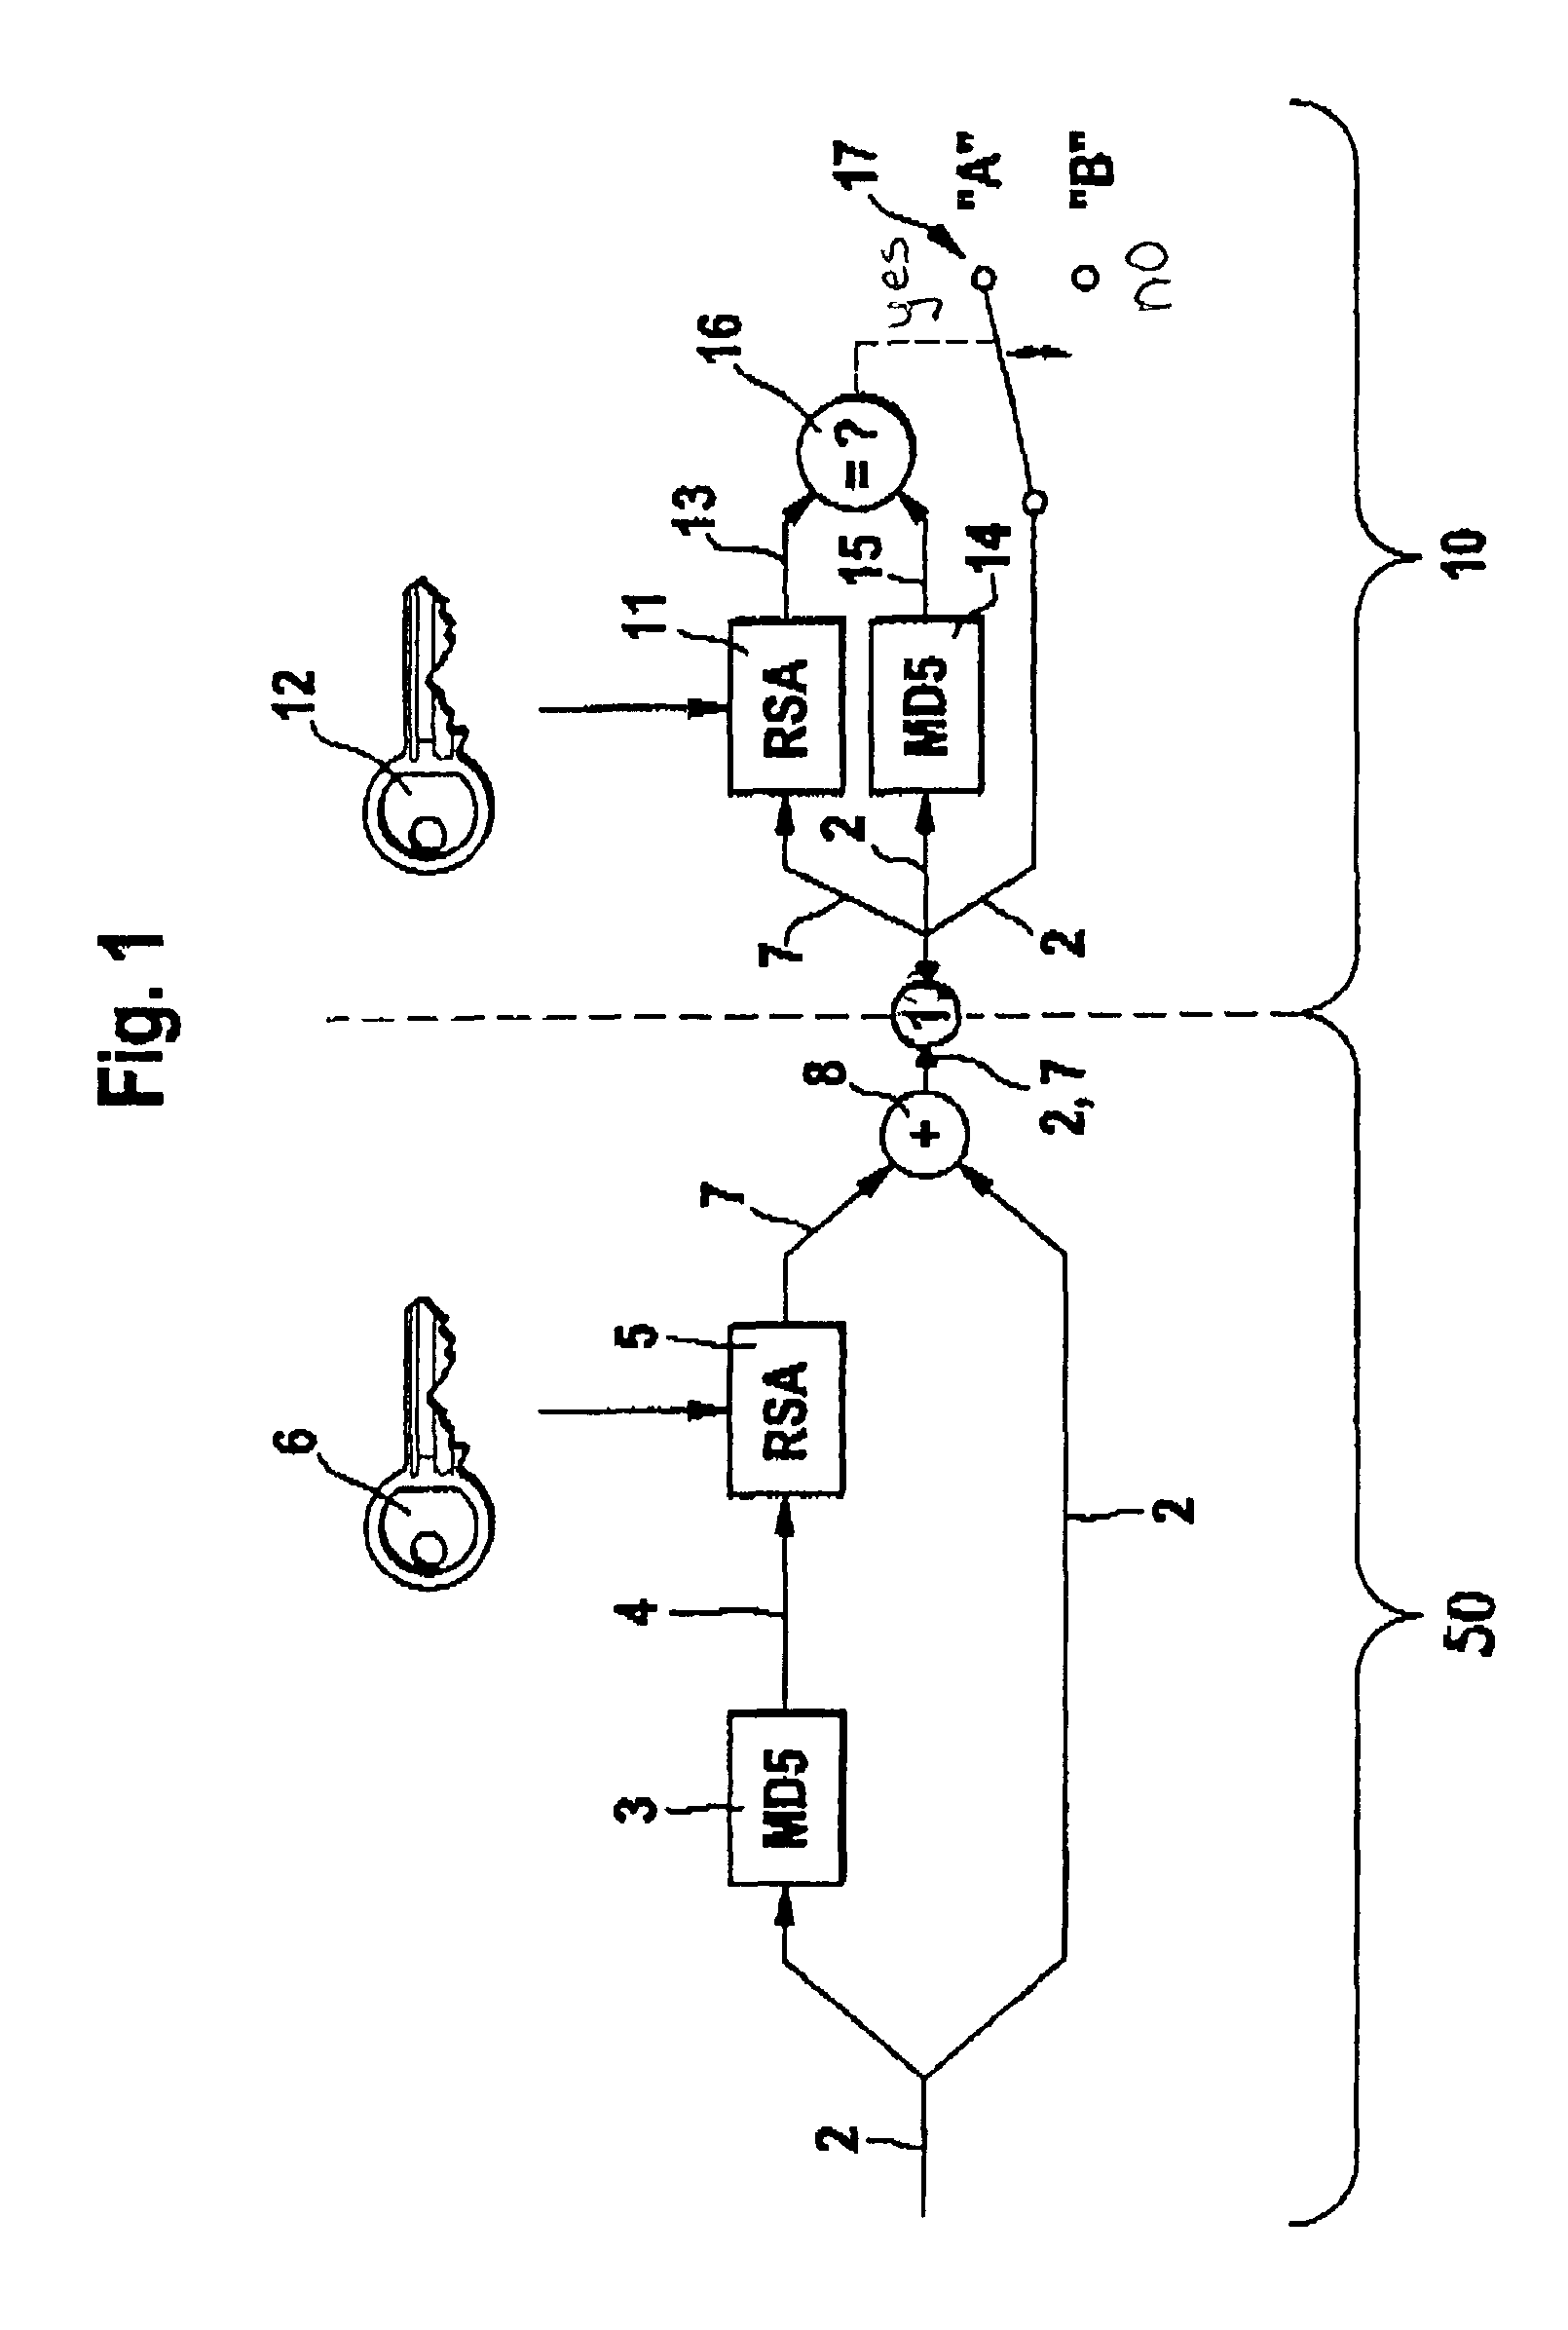 Method of protecting microcomputer system against manipulation of data stored in a memory assembly of the microcomputer system